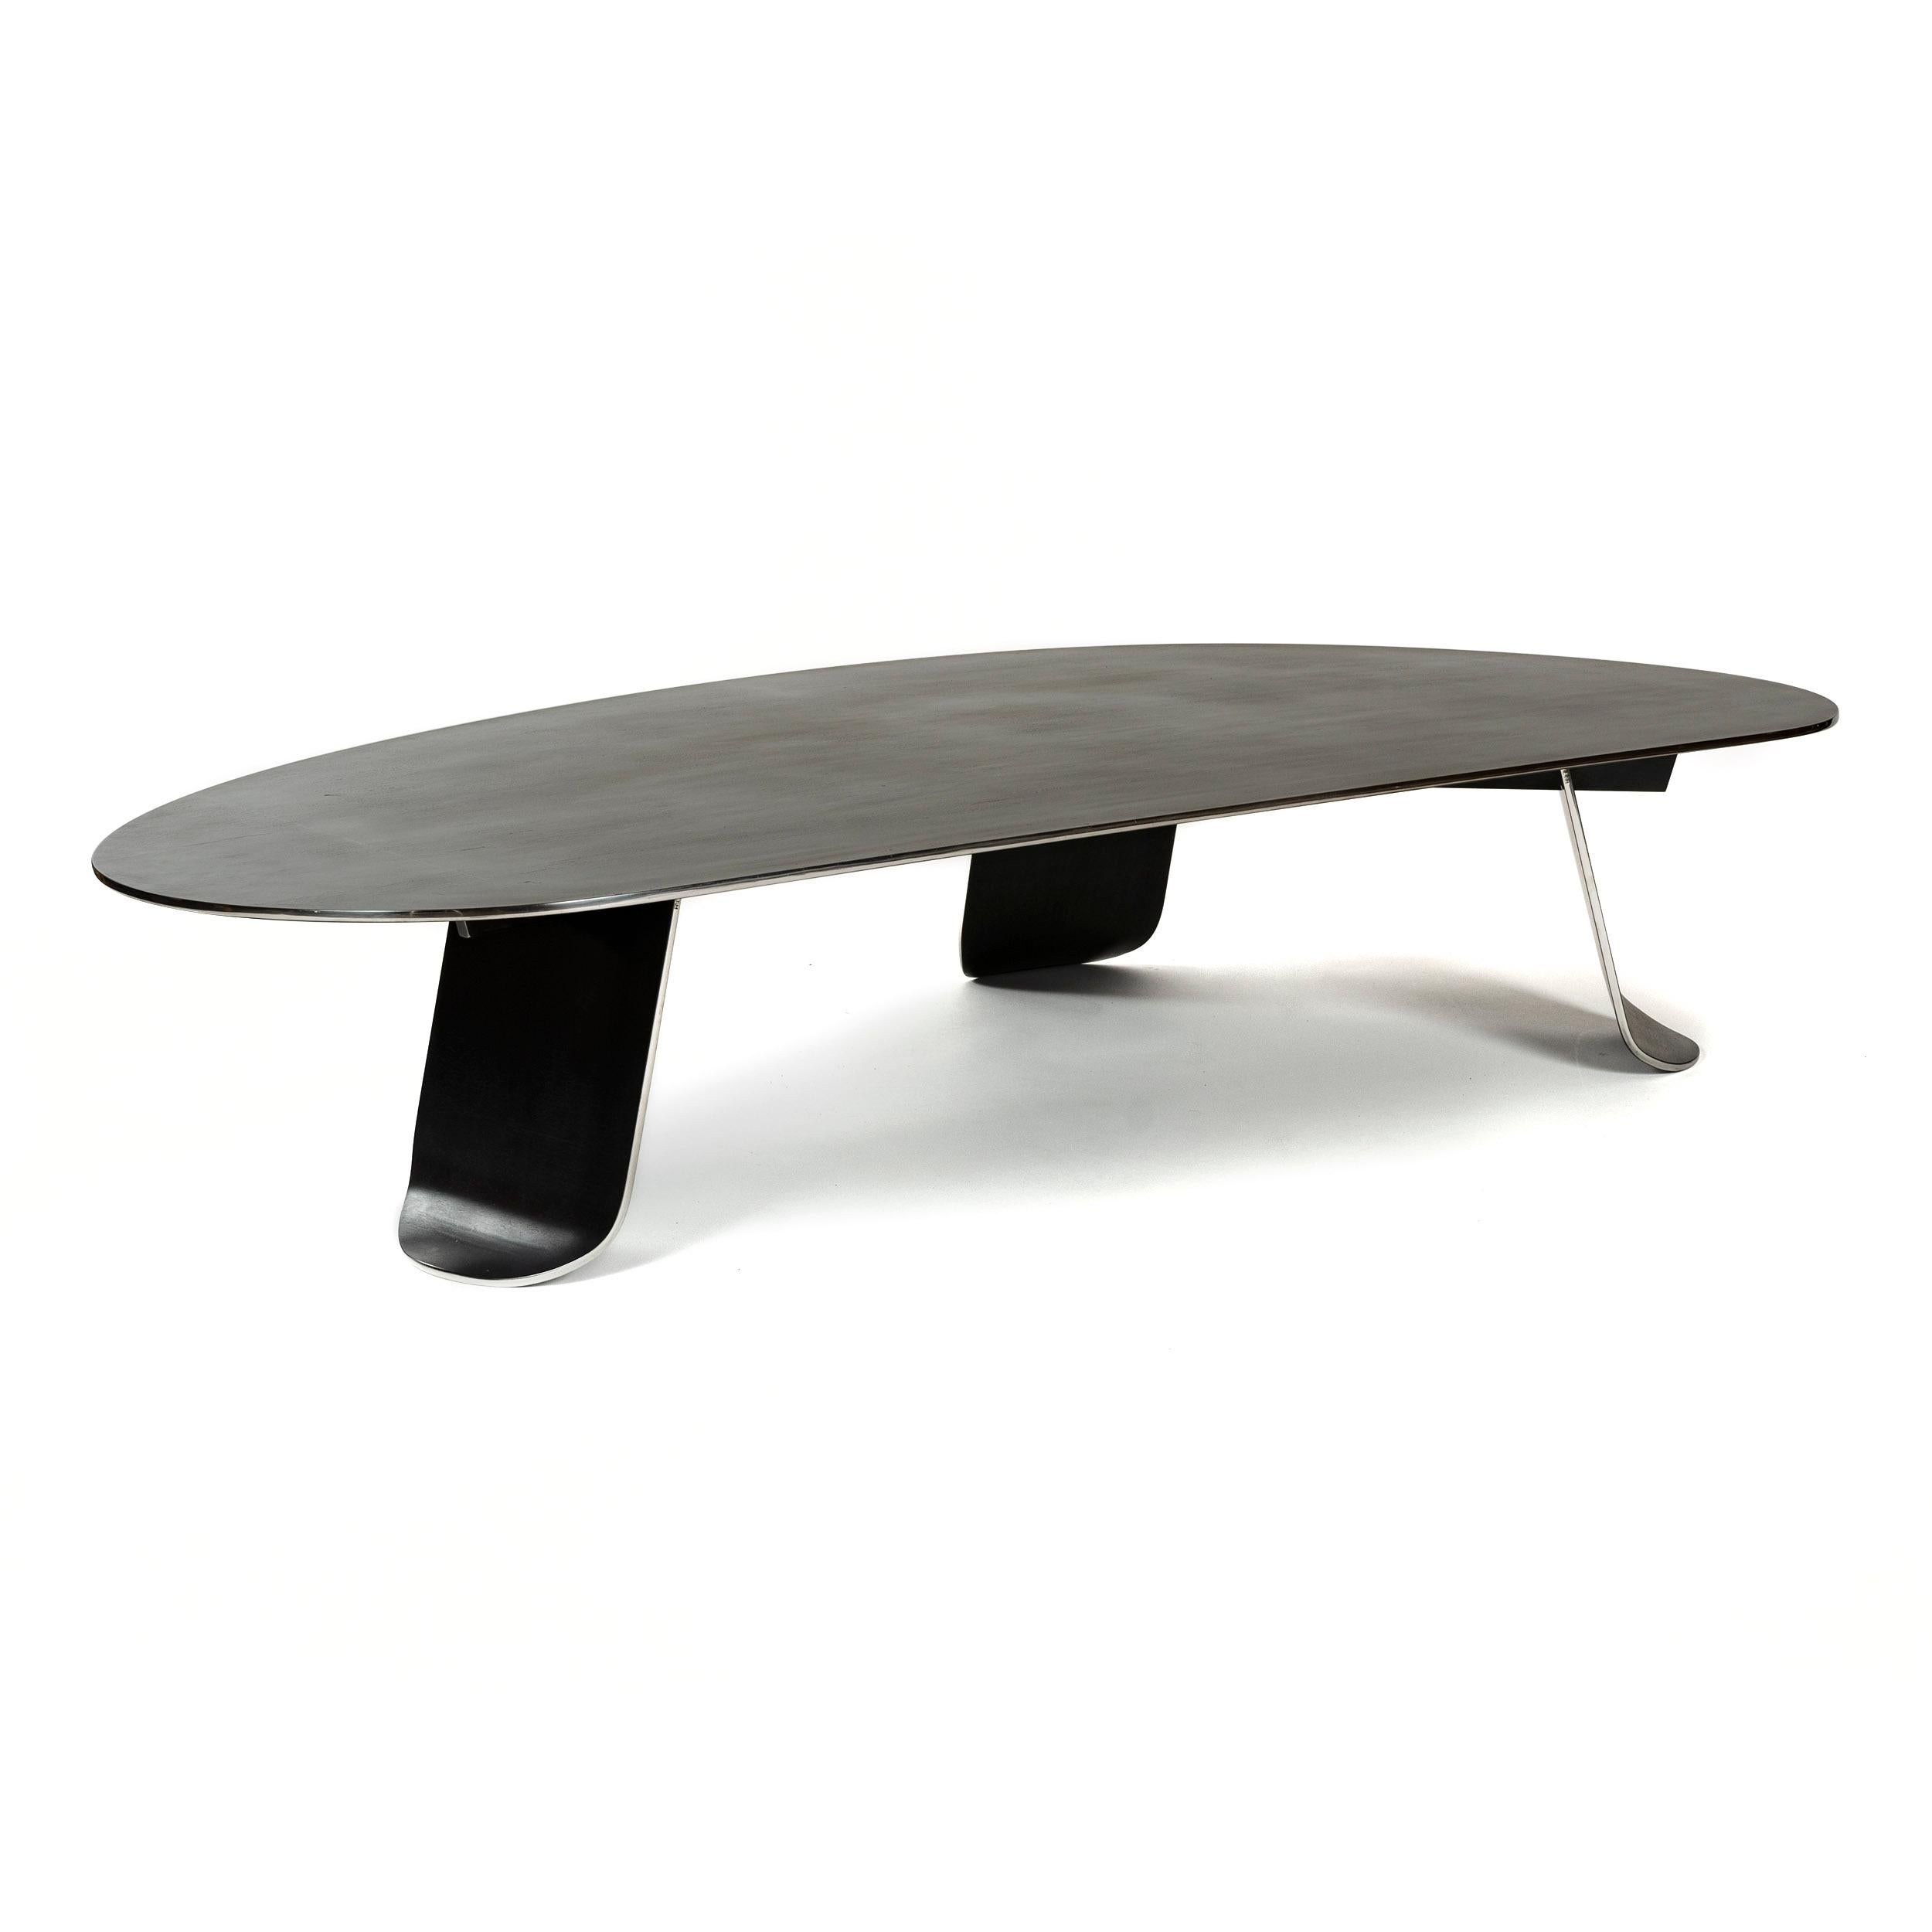 Wyeth Chrysalis Table No. 1 in Blackened Stainless Steel with Polished Edges For Sale 2